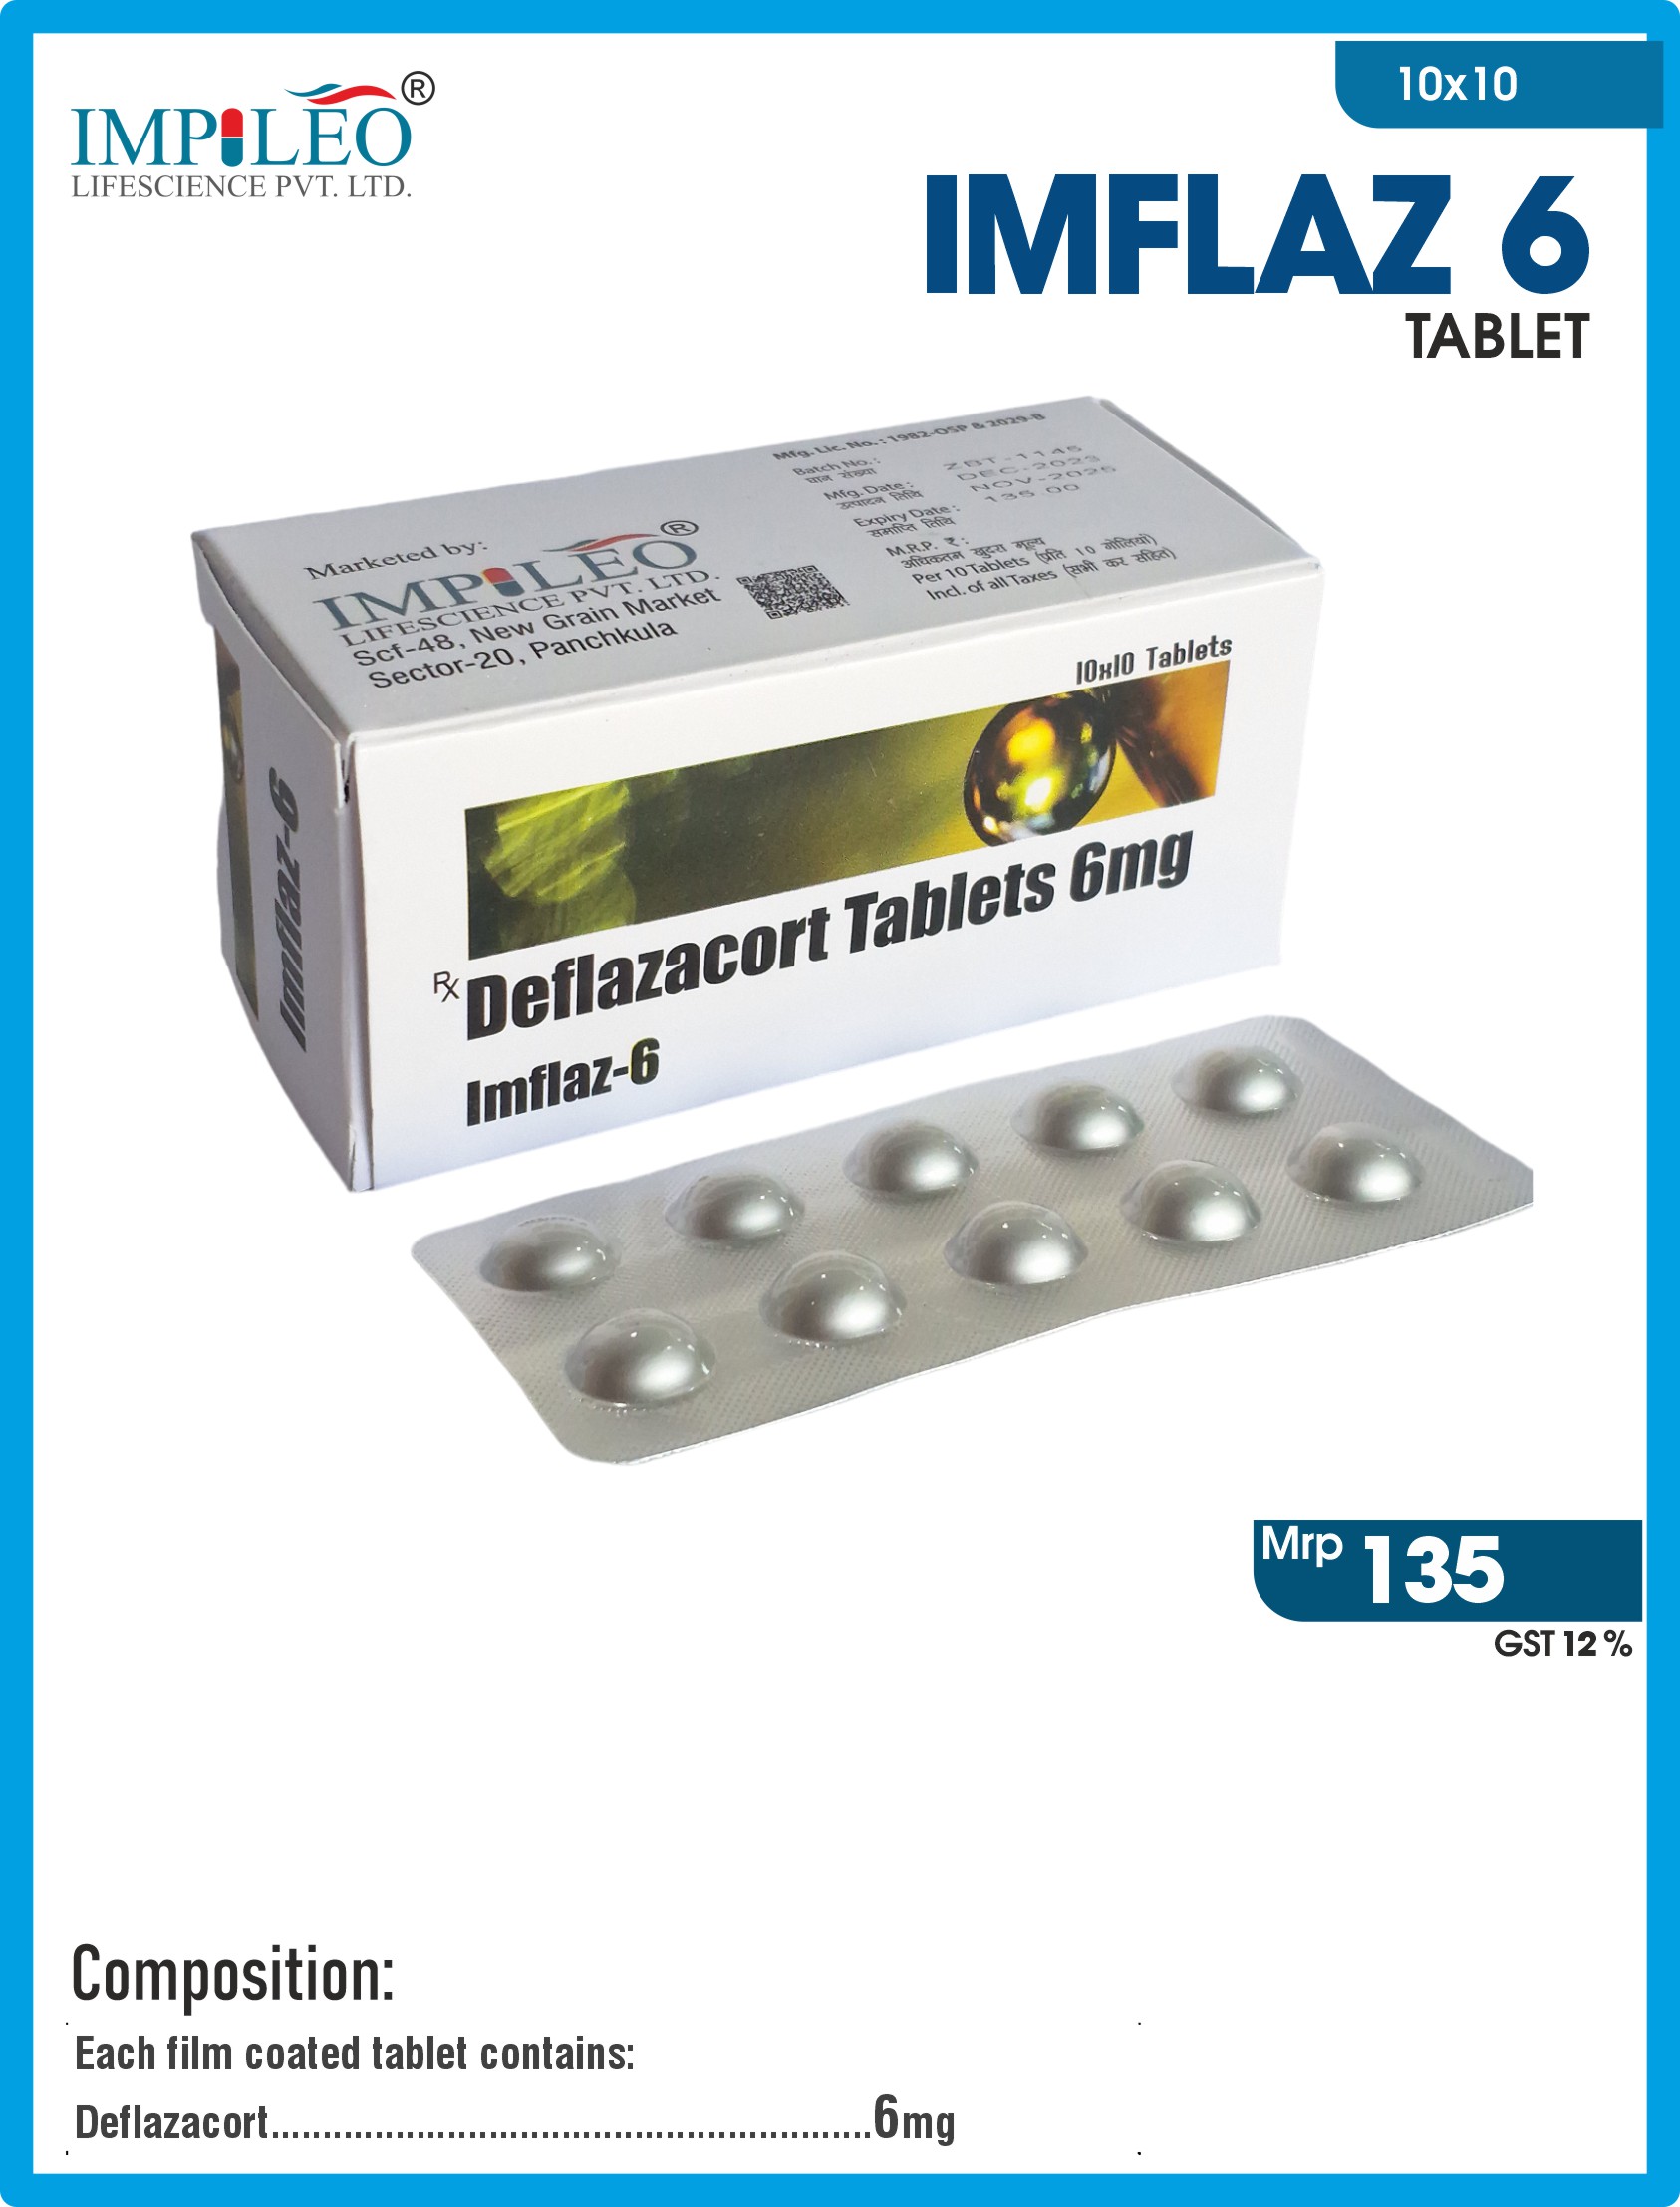 Boost Productivity : Source IMFLAZ 6 Tablets from Trusted Third-Party Manufacturer in India